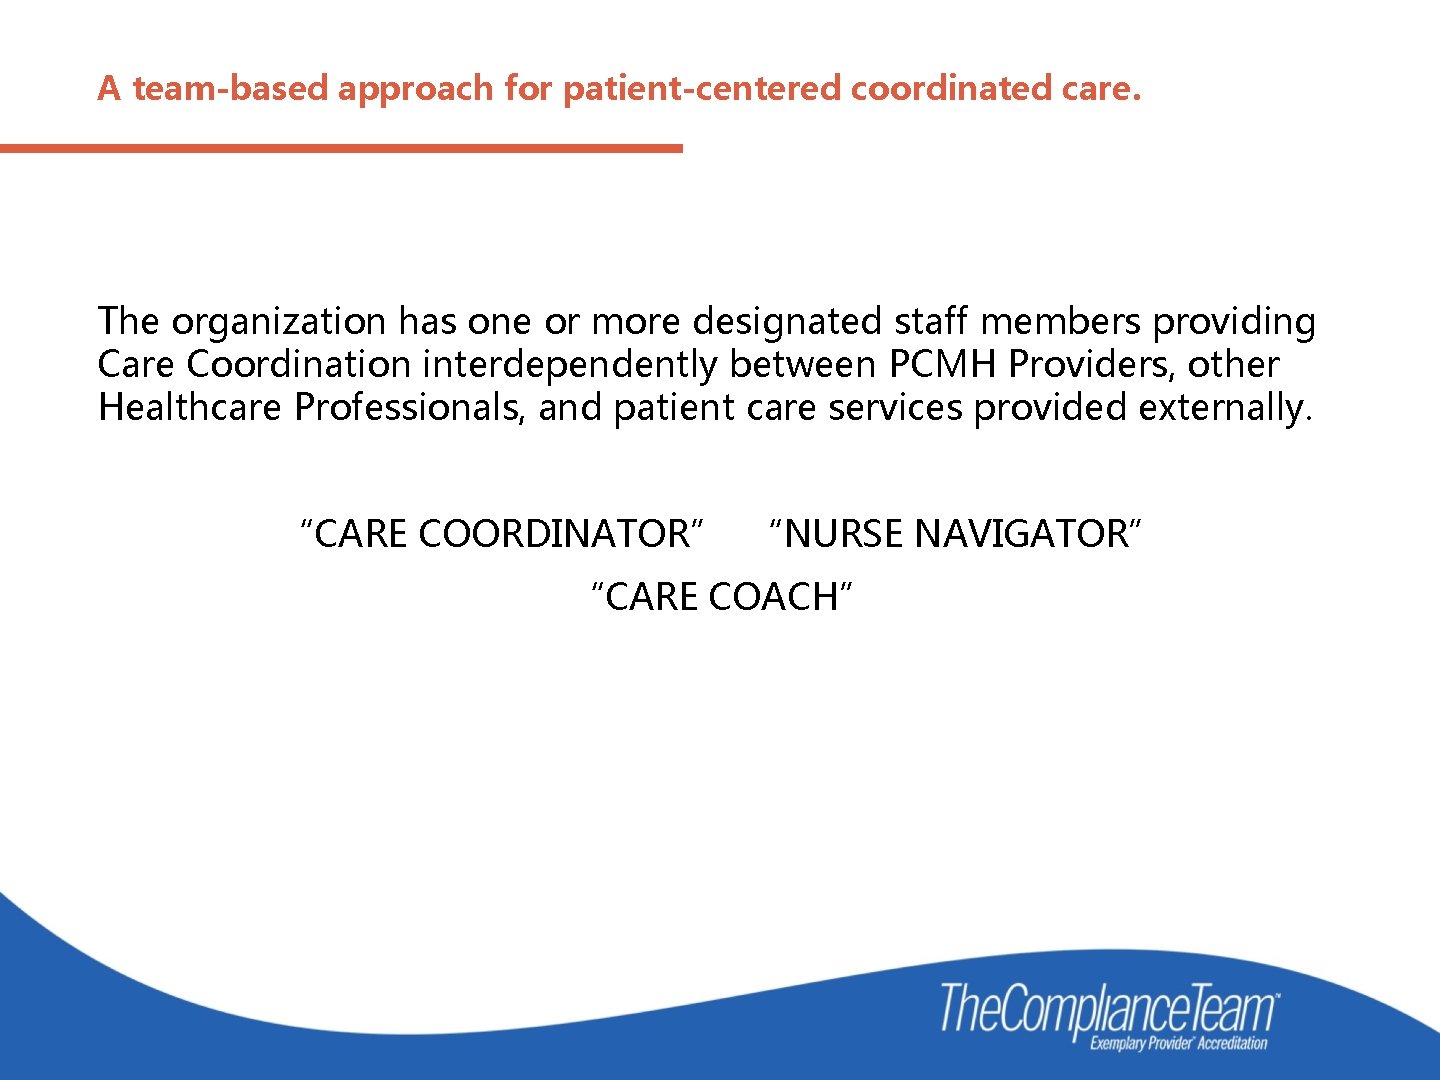 A team-based approach for patient-centered coordinated care. The organization has one or more designated